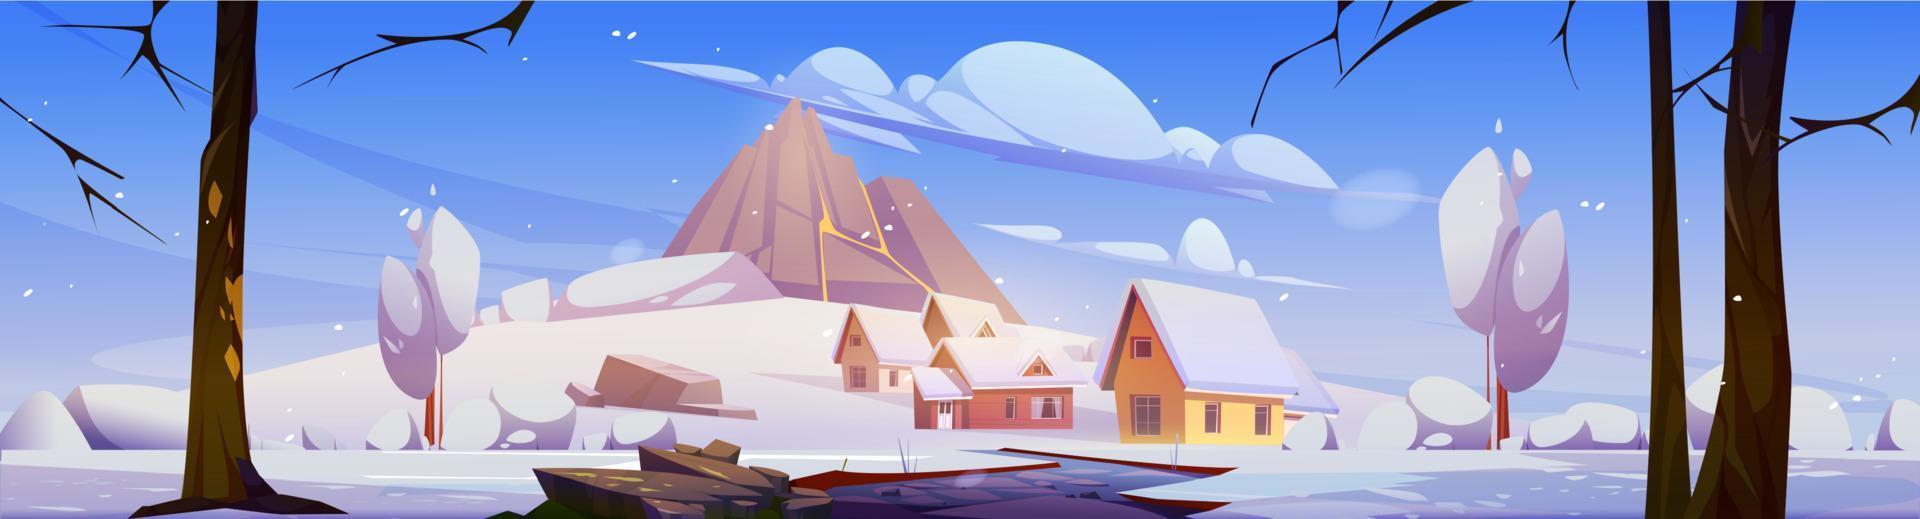 Winter landscape with mountain, houses and snow vector